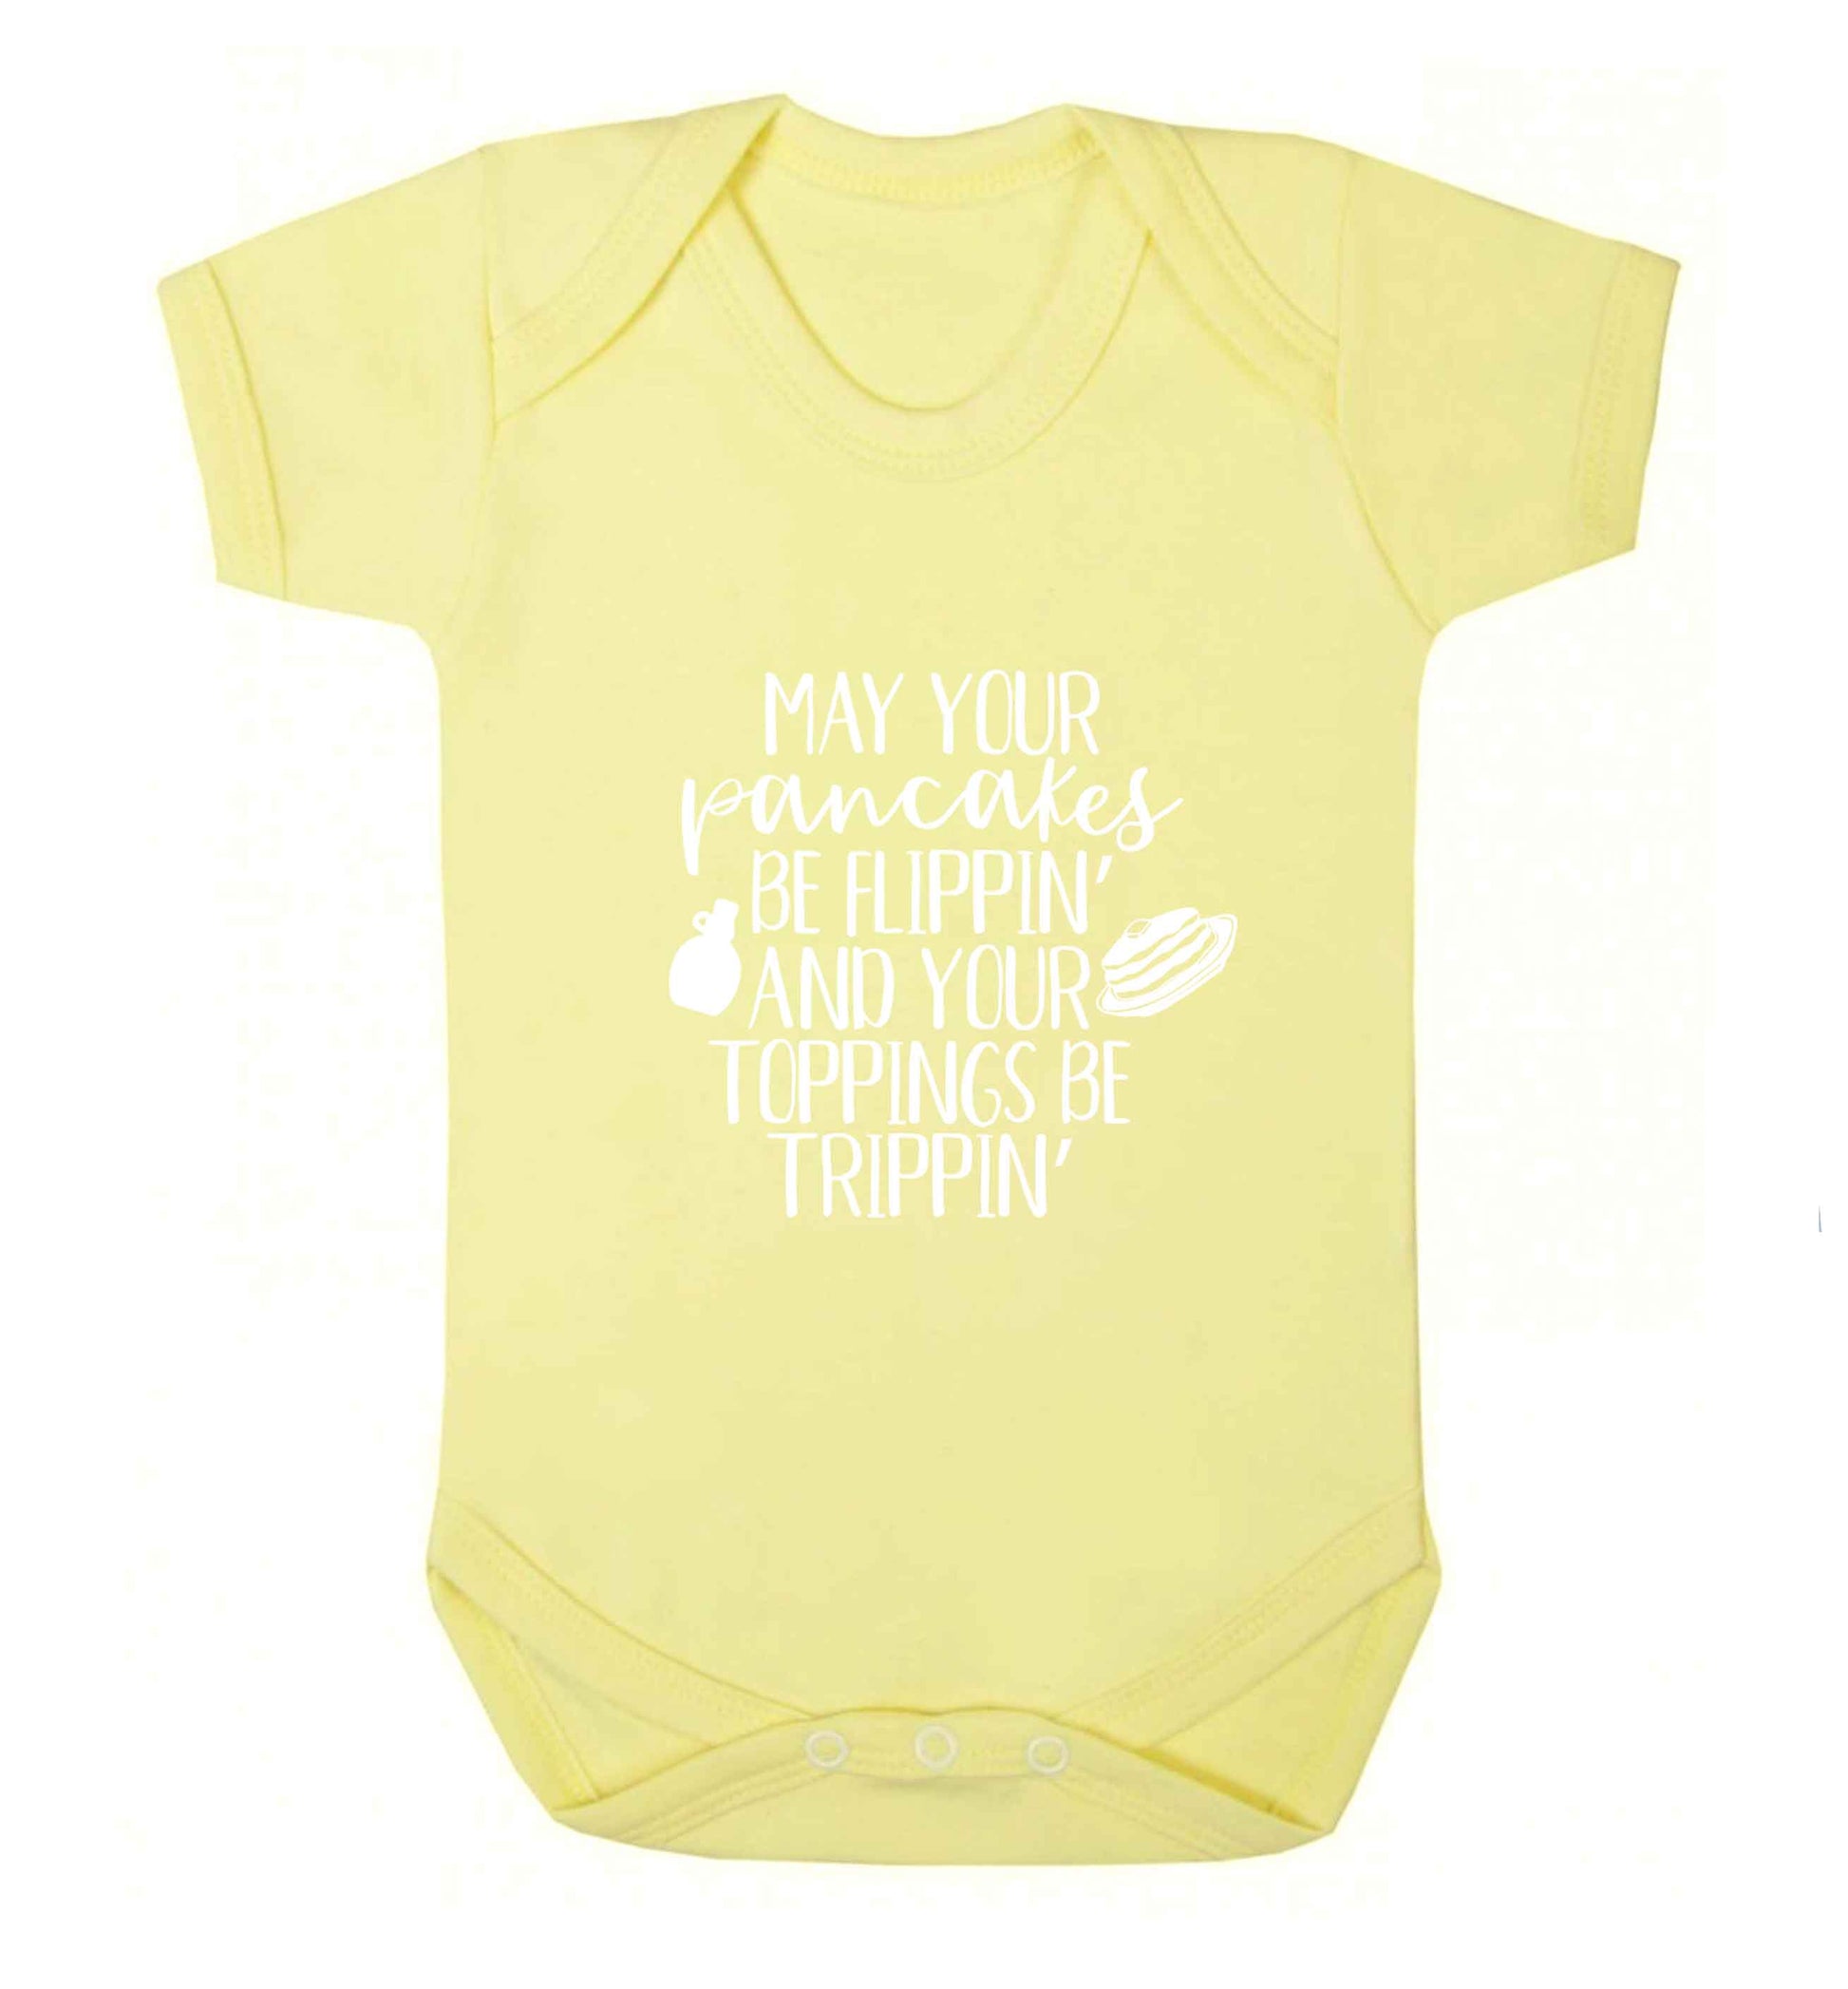 May your pancakes be flippin' and your toppings be trippin' baby vest pale yellow 18-24 months